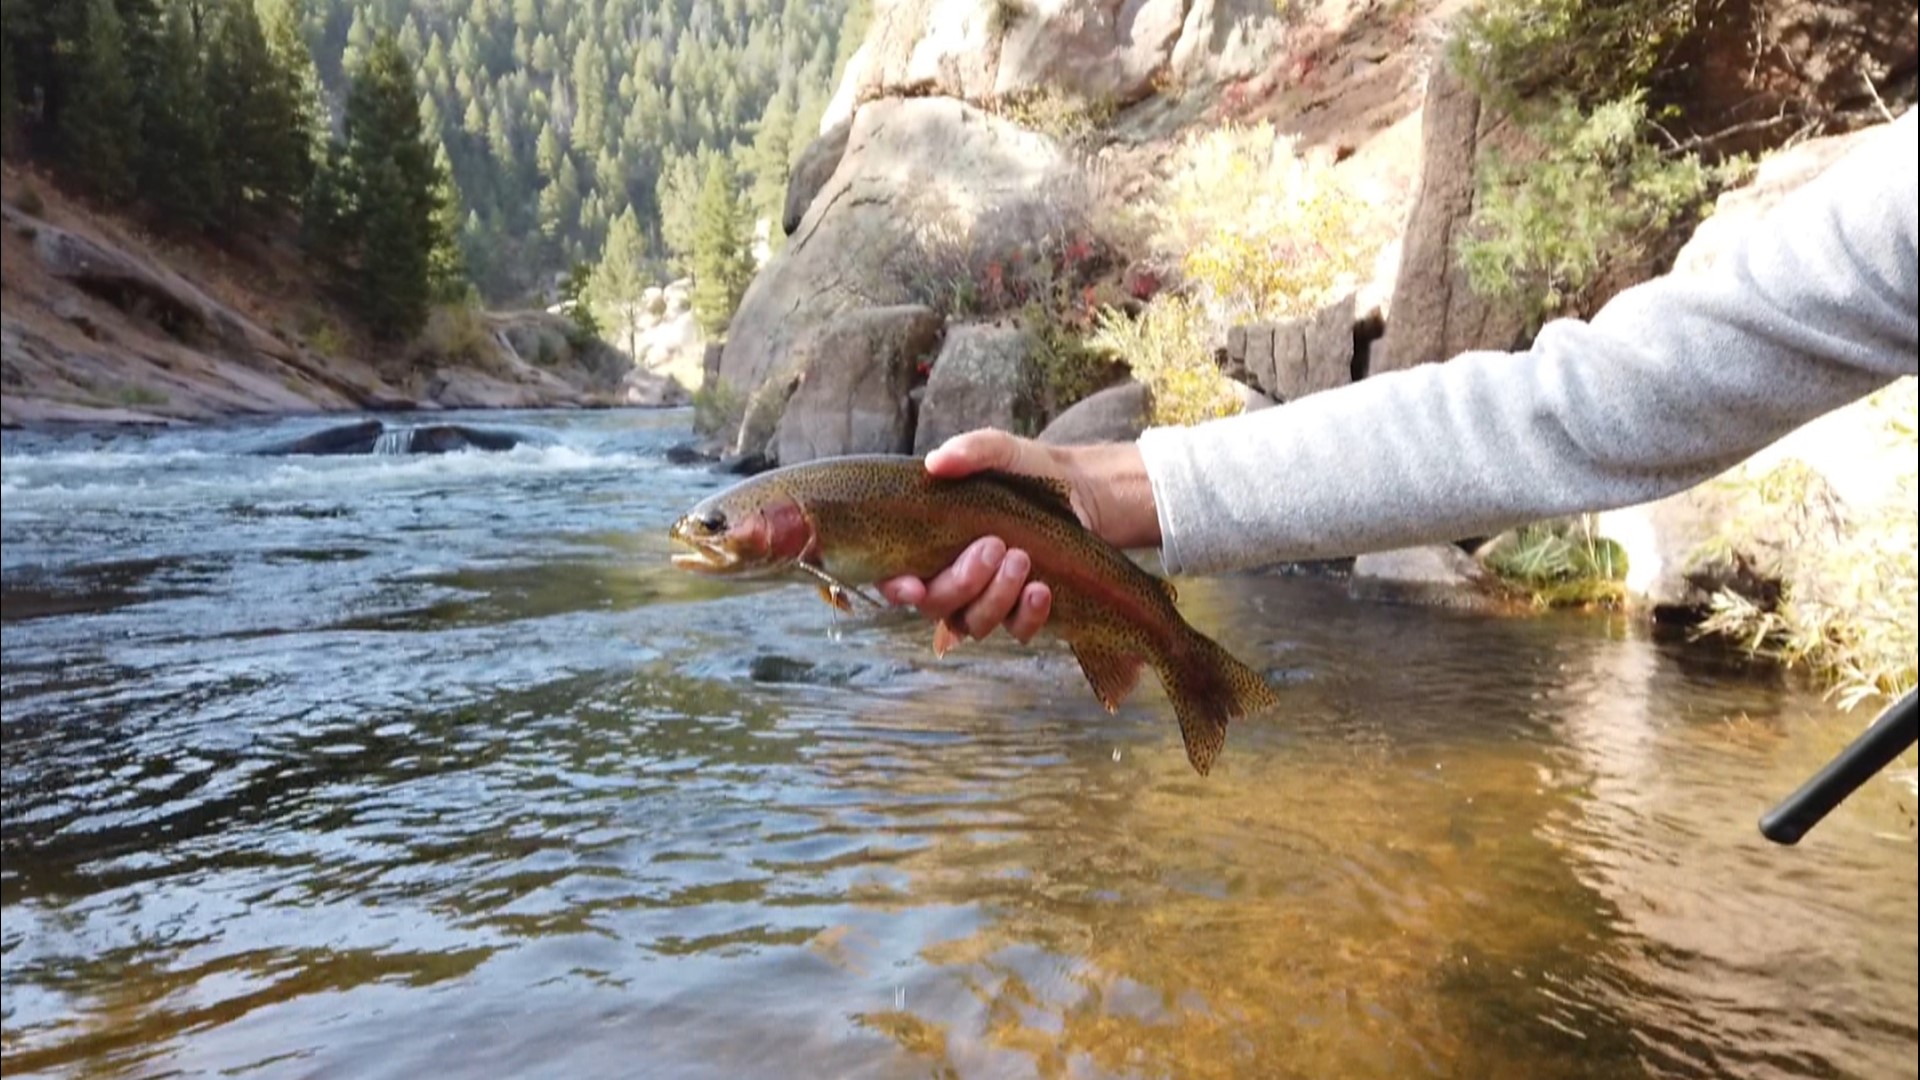 Where and how to buy a fishing license in Colorado